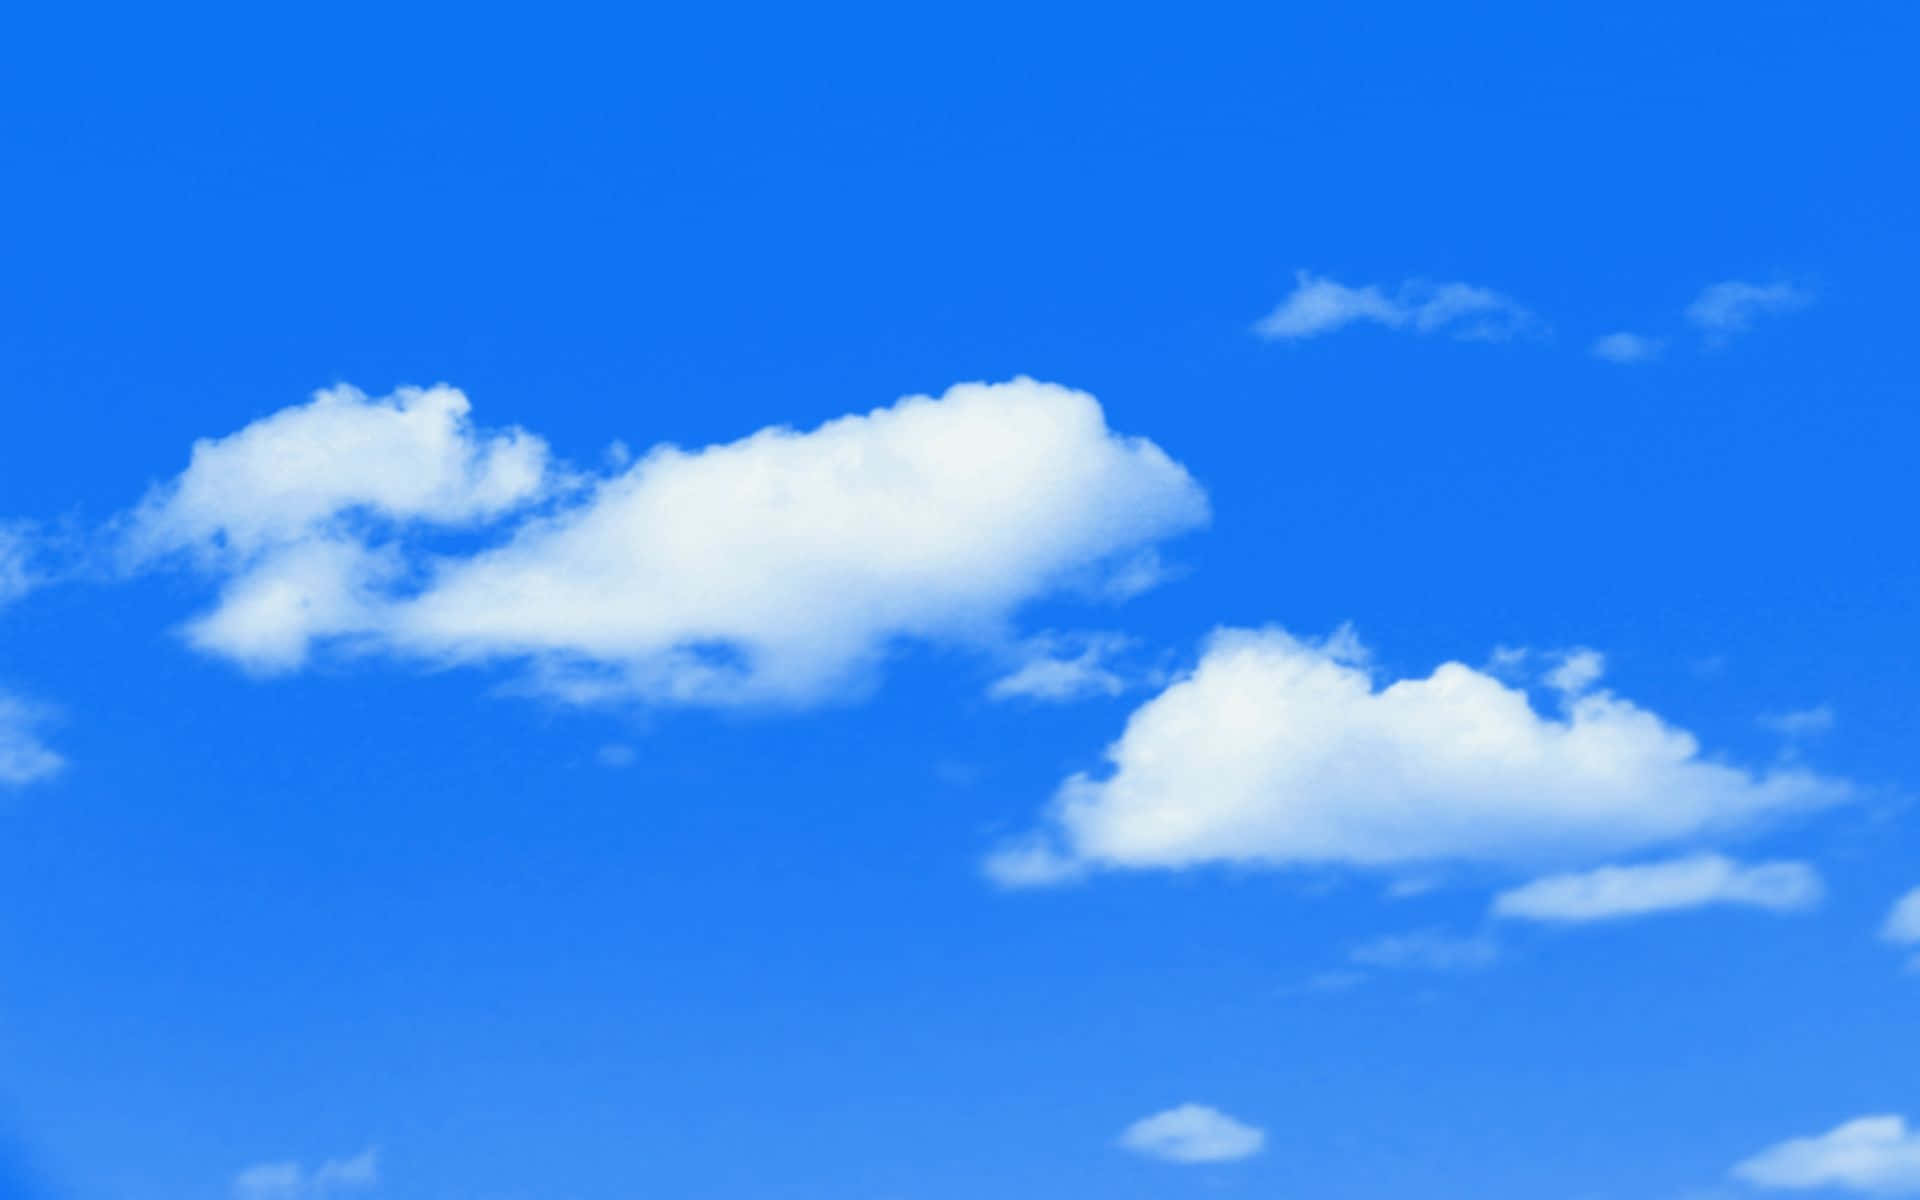 A Blue Sky With White Clouds In The Background